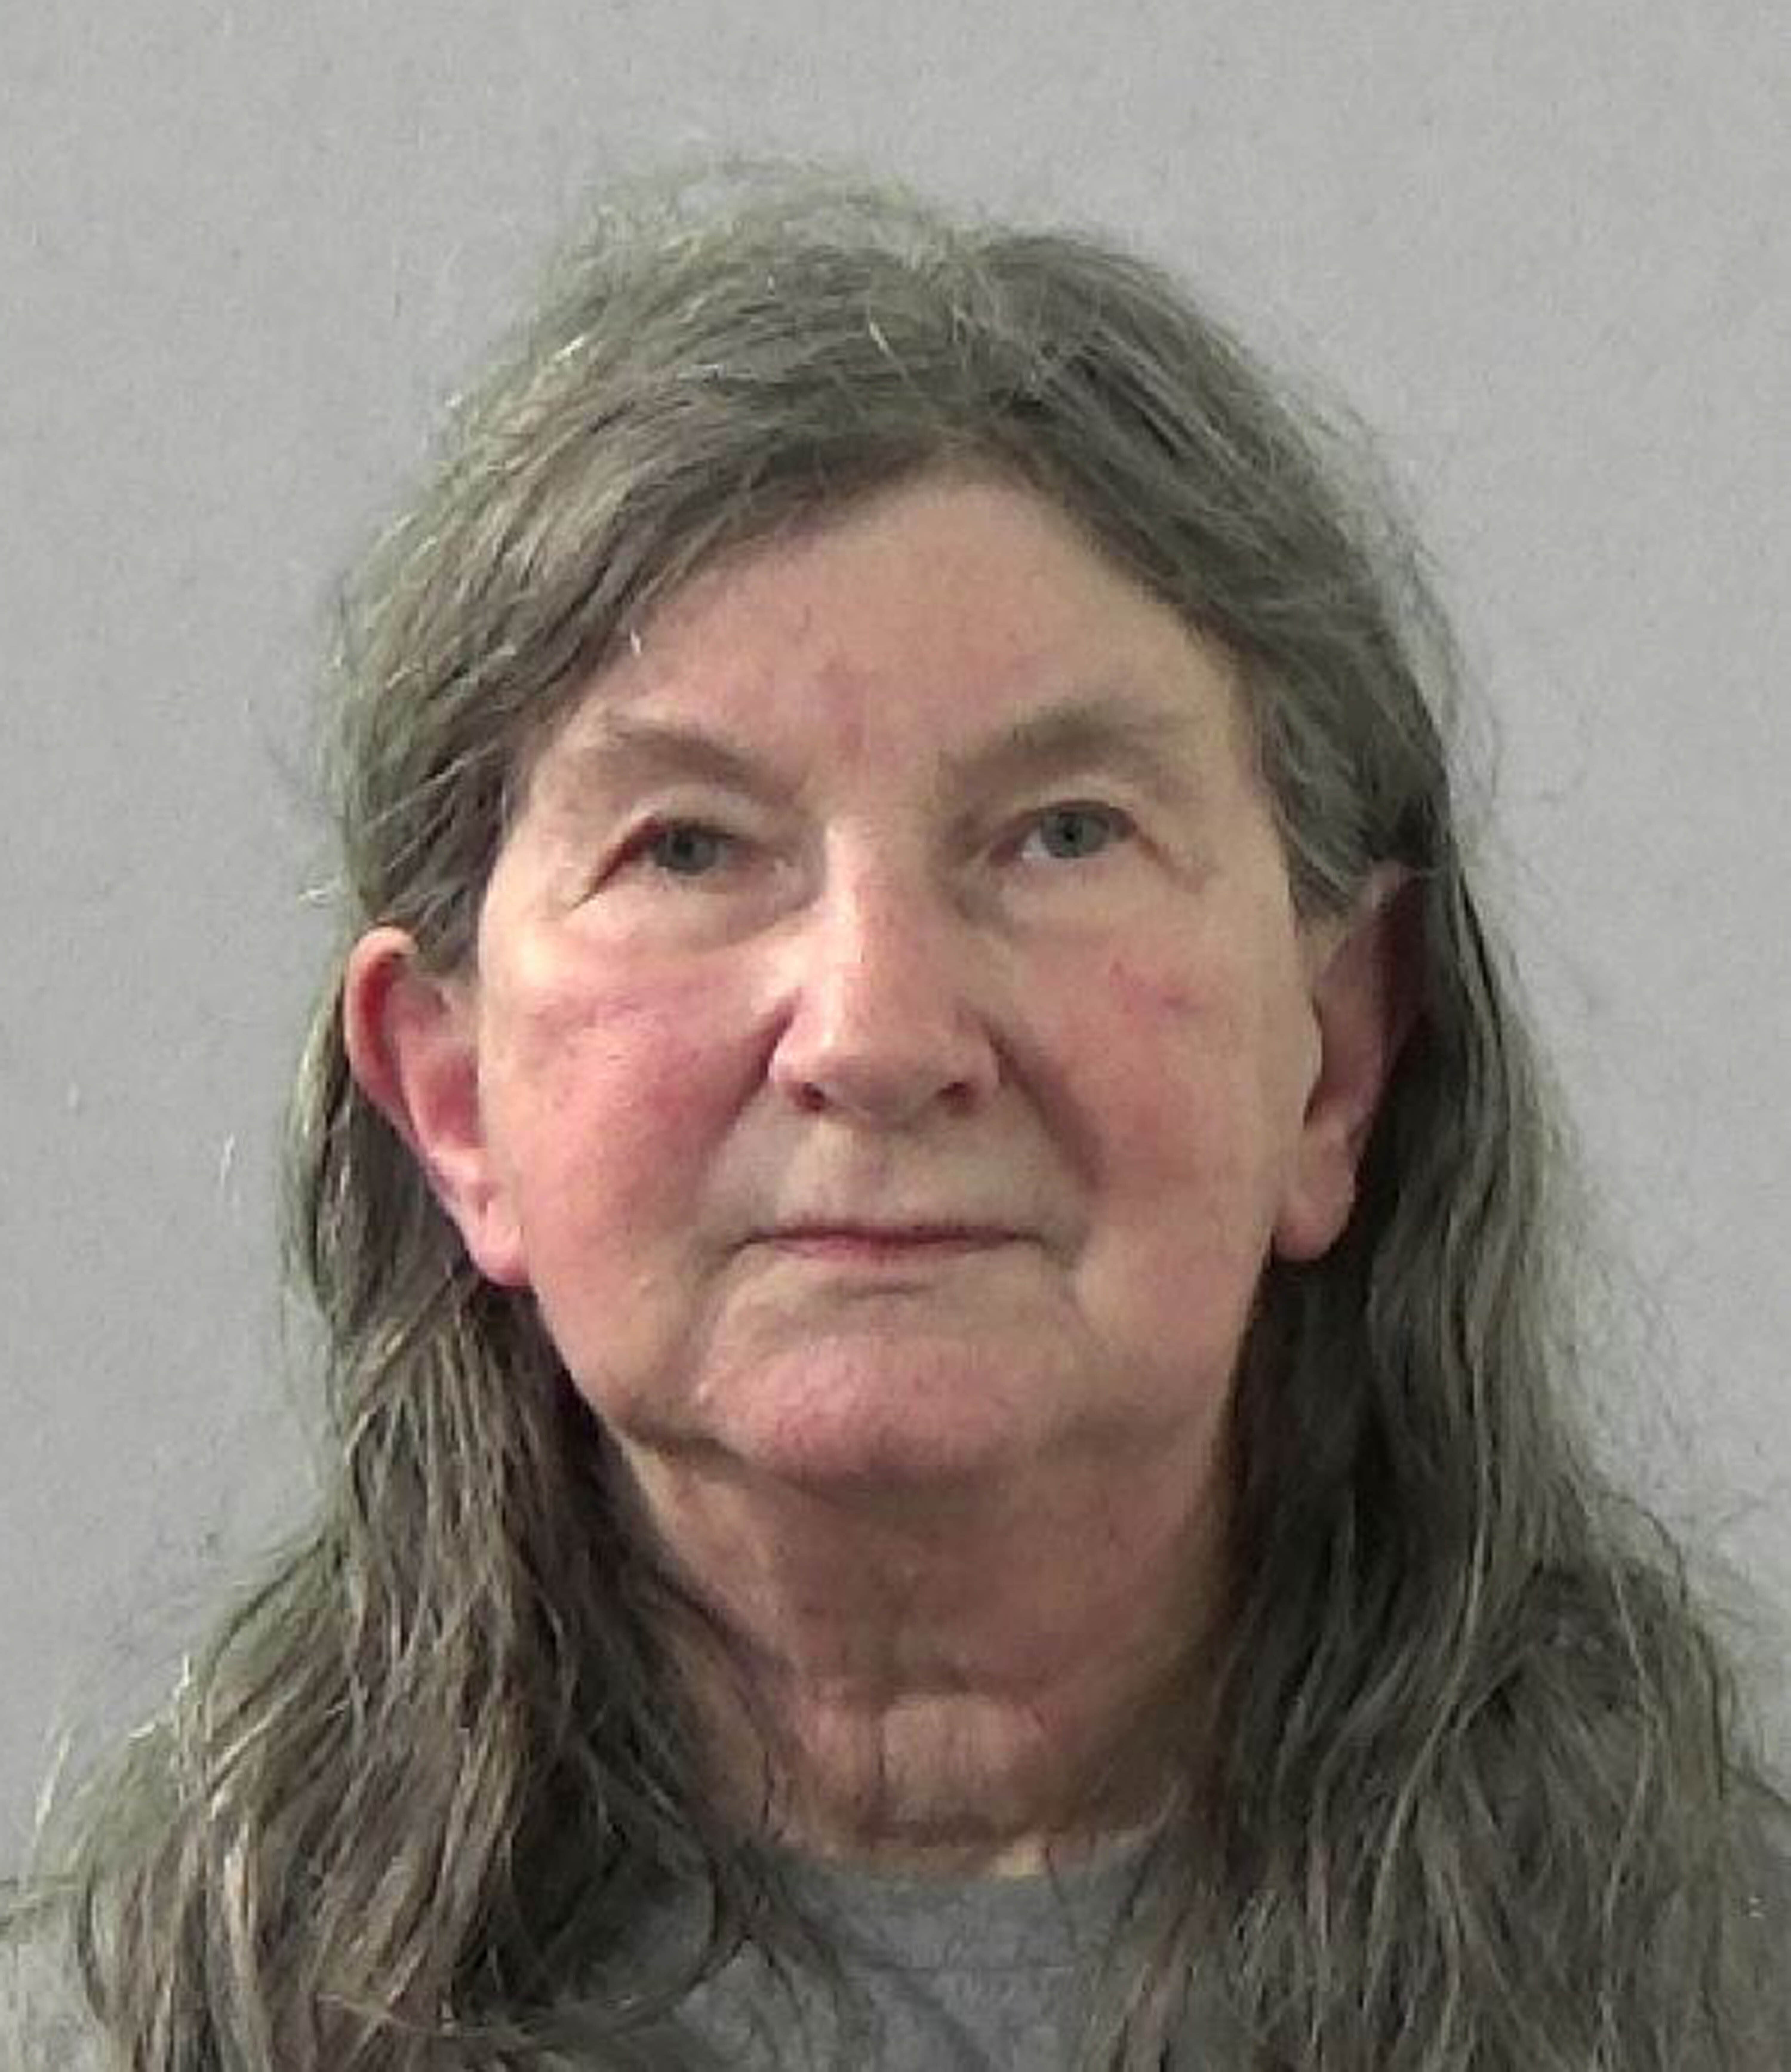 Janet Dunn who held a pillow over her husband’s face after an argument about their finances has pleaded guilty to his manslaughter (Northumbria Police/PA)